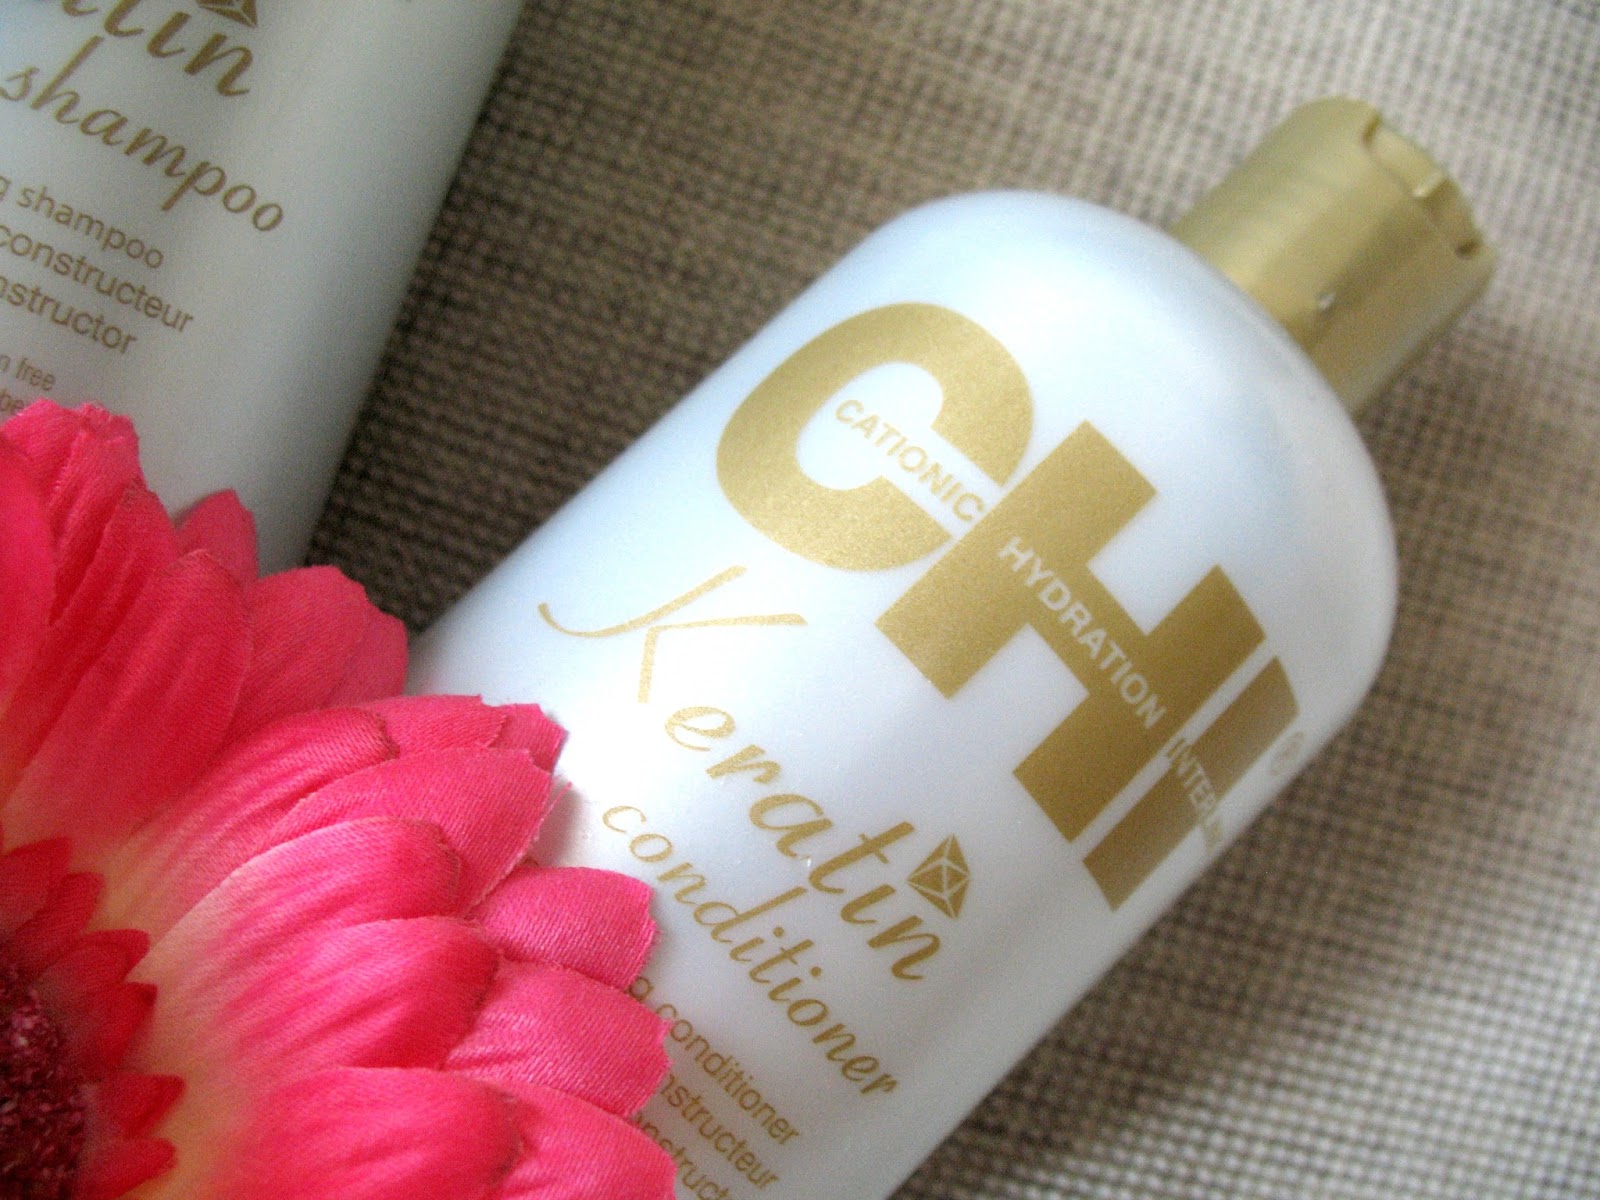 CHI_keratin_conditioner_review_beauty_blog_08